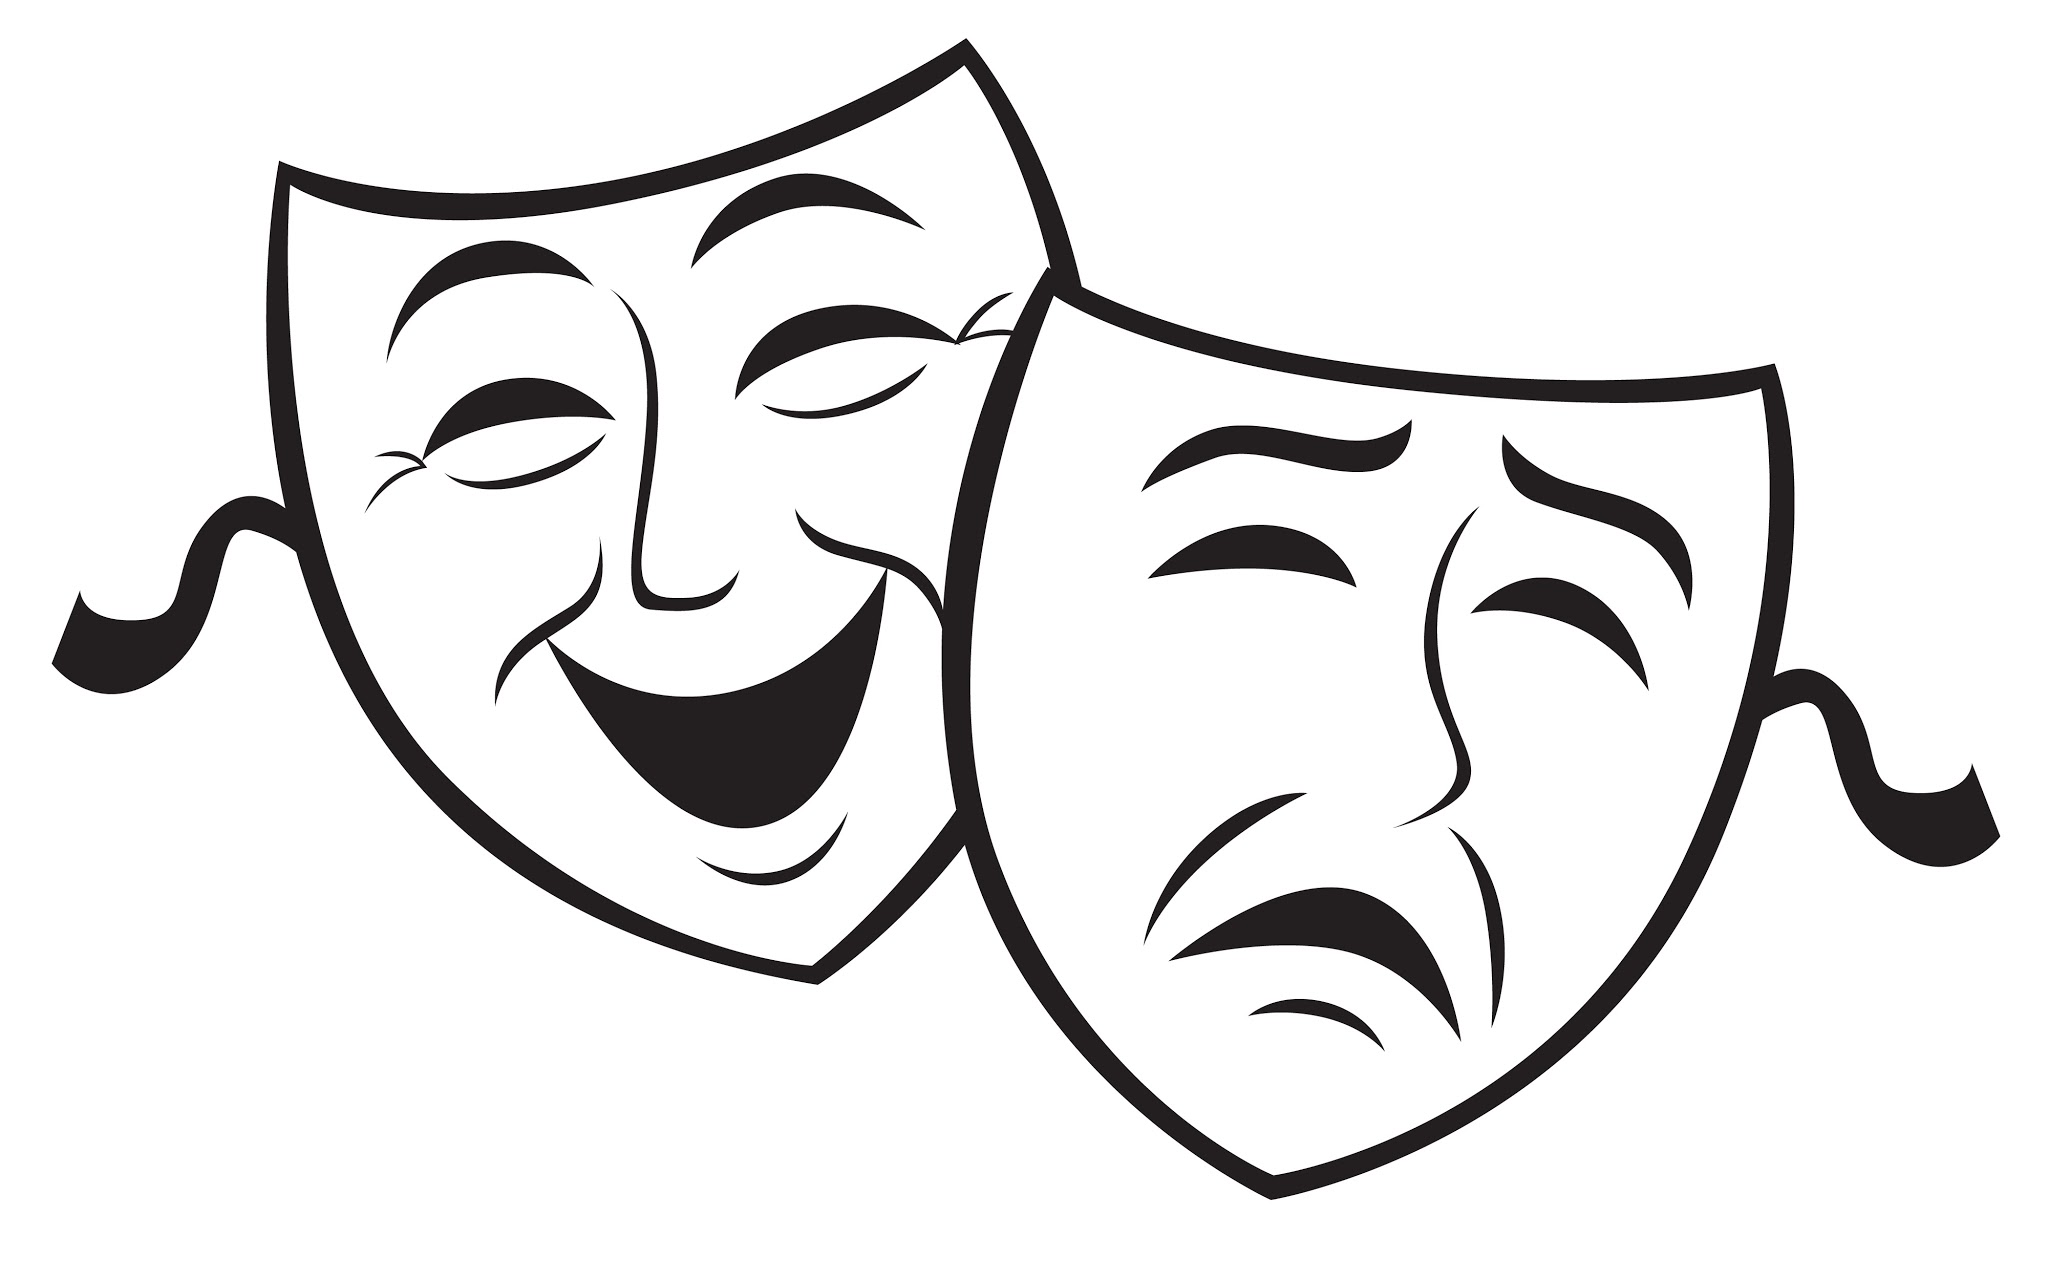 Drama faces black and white clipart 